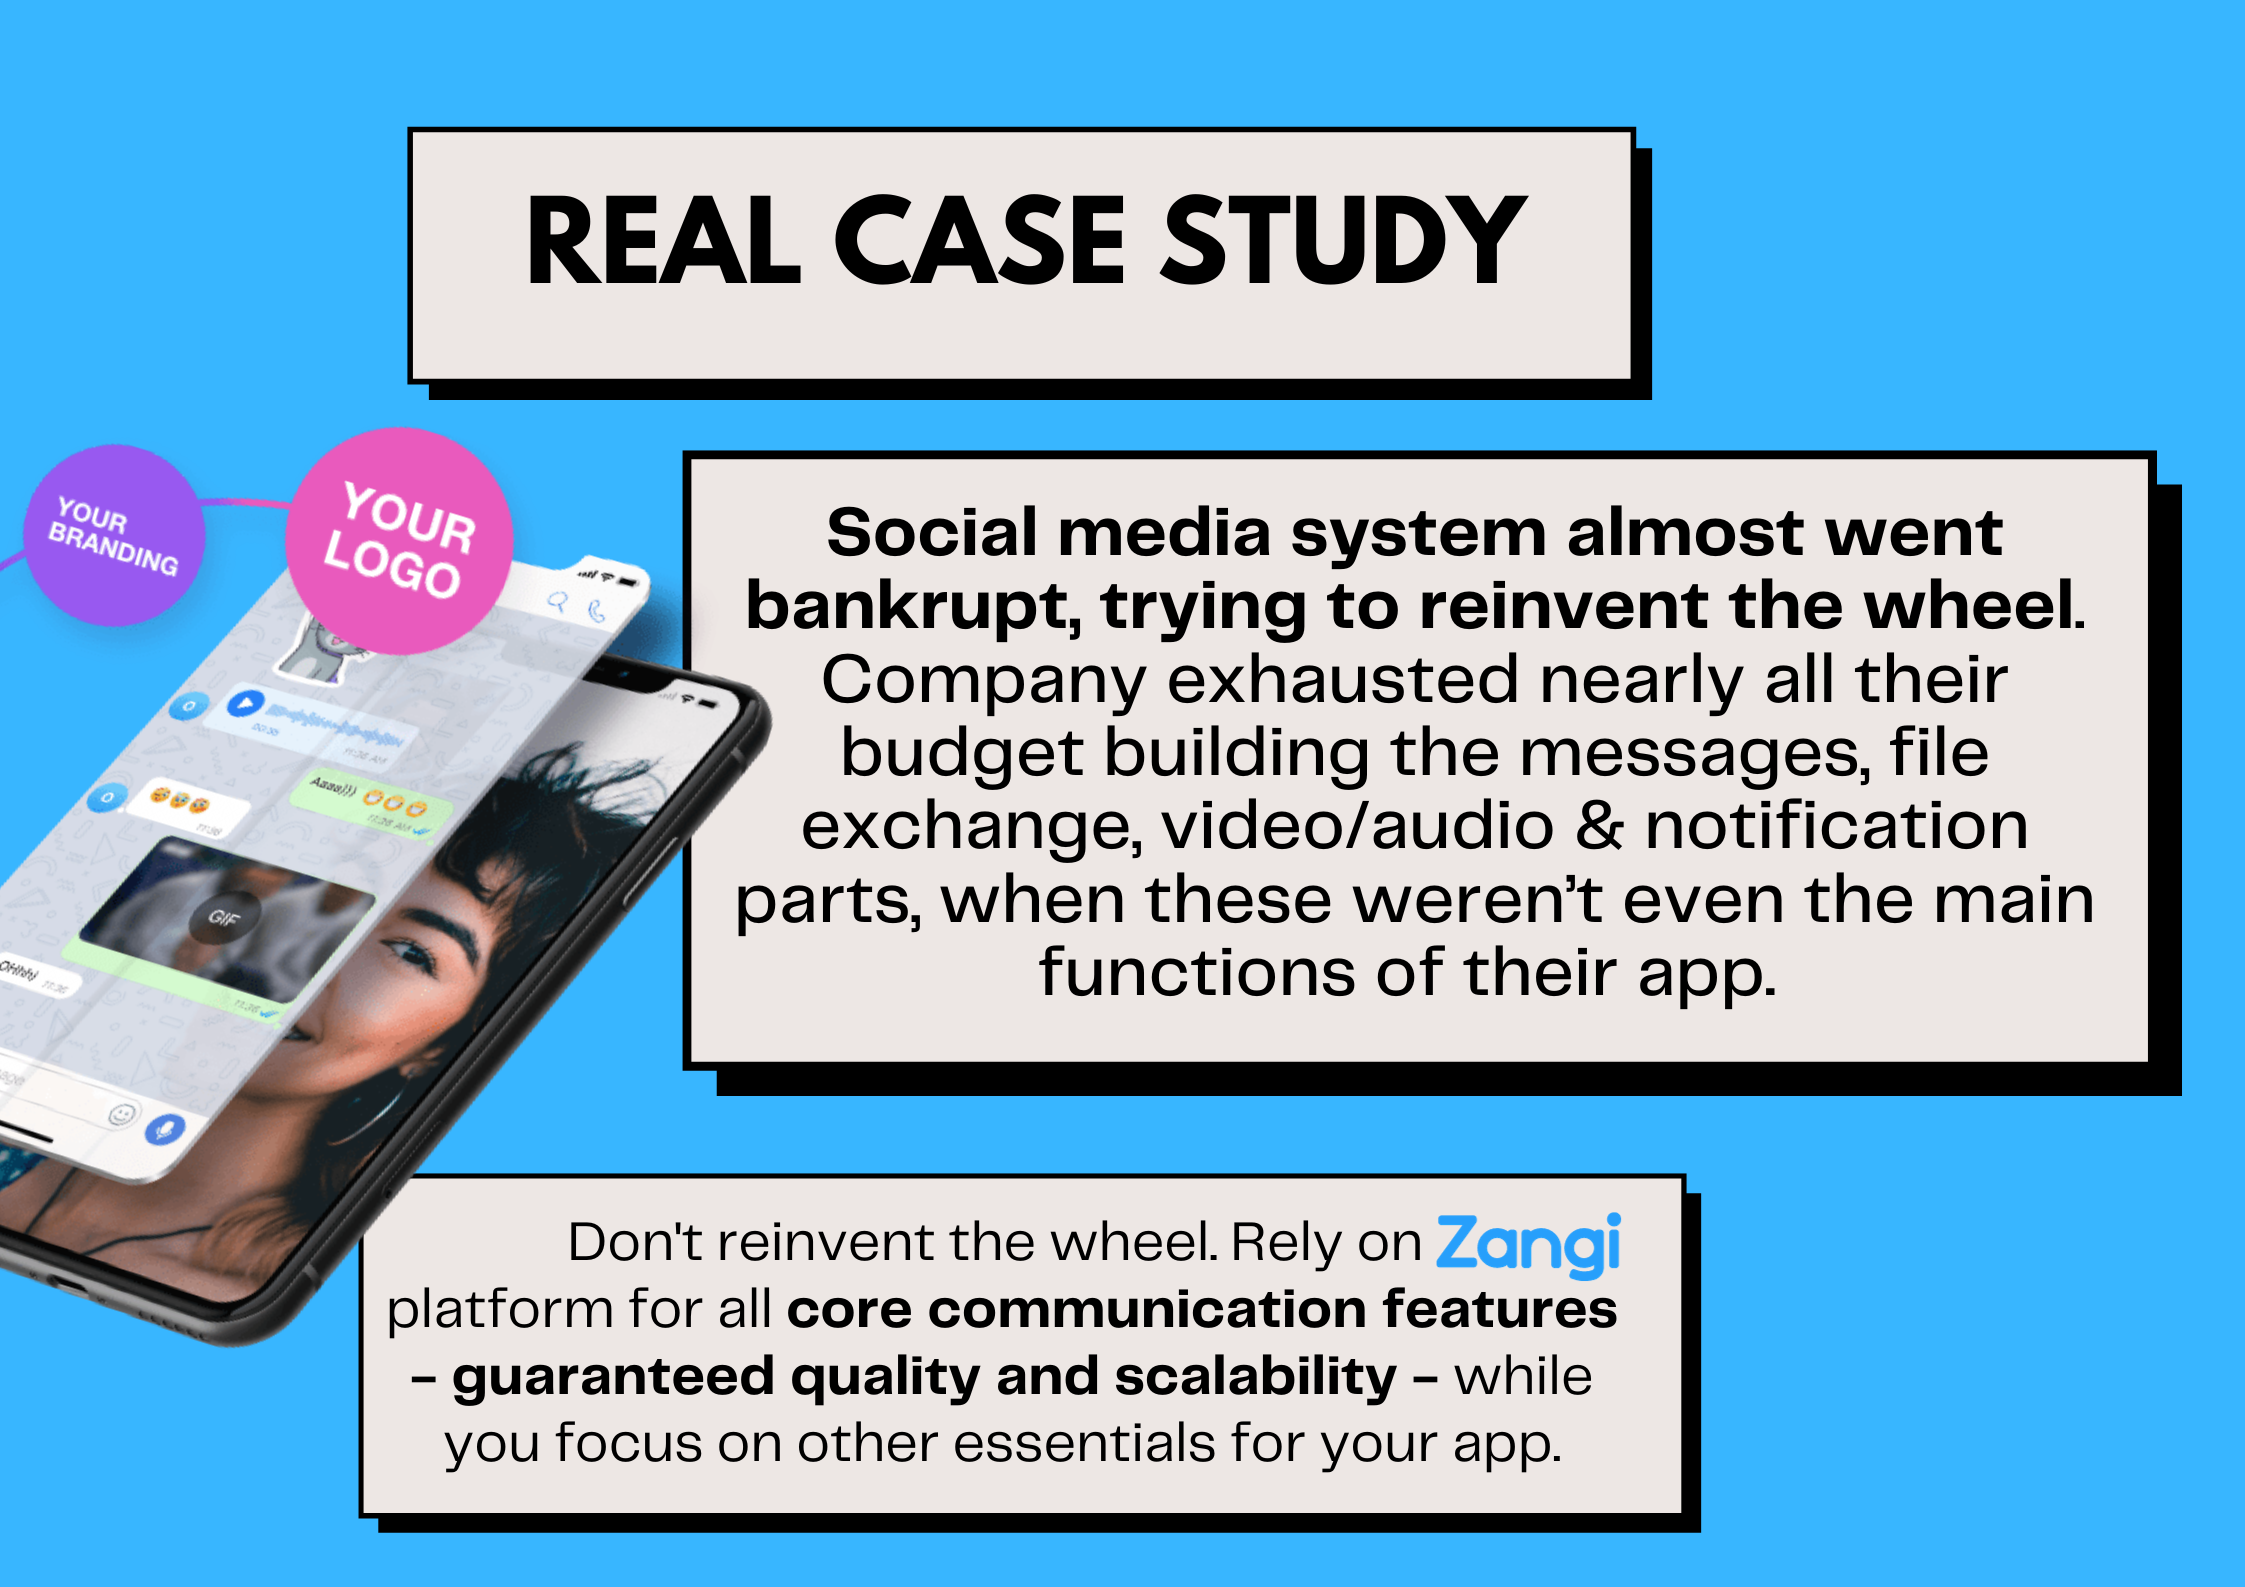  chat features for social media app real case study